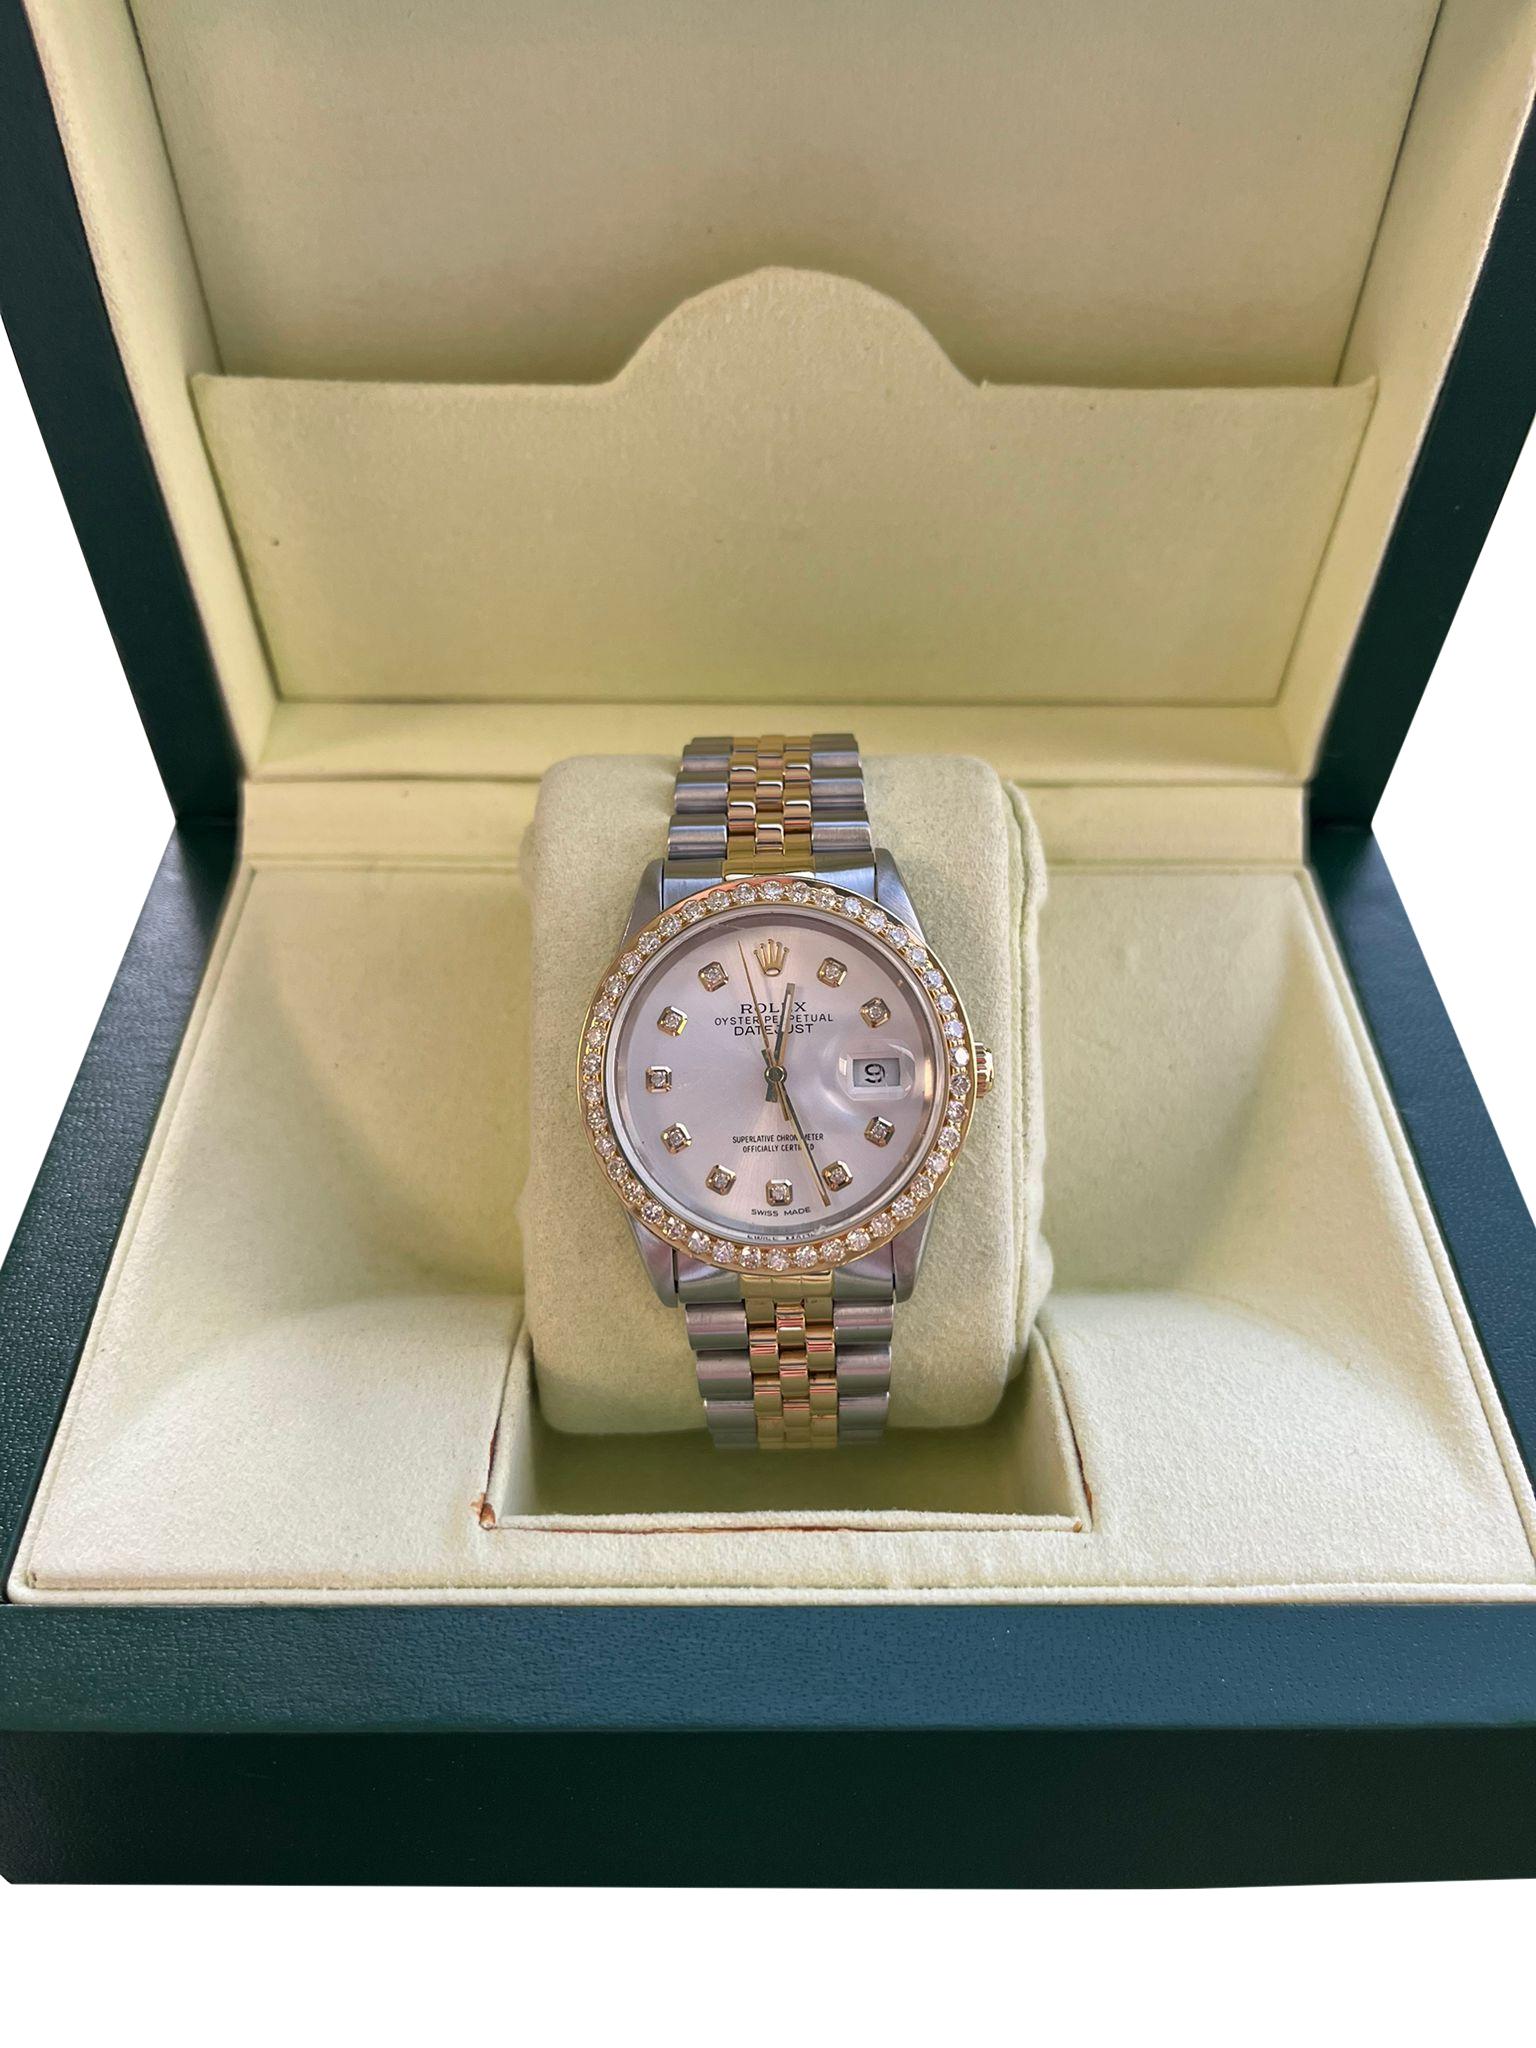 Rolex Datejust Steel Yellow Gold Rose Gray Diamond Mens Watch 16233. Officially certified chronometer automatic self-winding movement. Stainless steel case 36.0 mm in diameter. Rolex logo on a crown. Aftermarket Diamond Dial, Aftermarket diamond